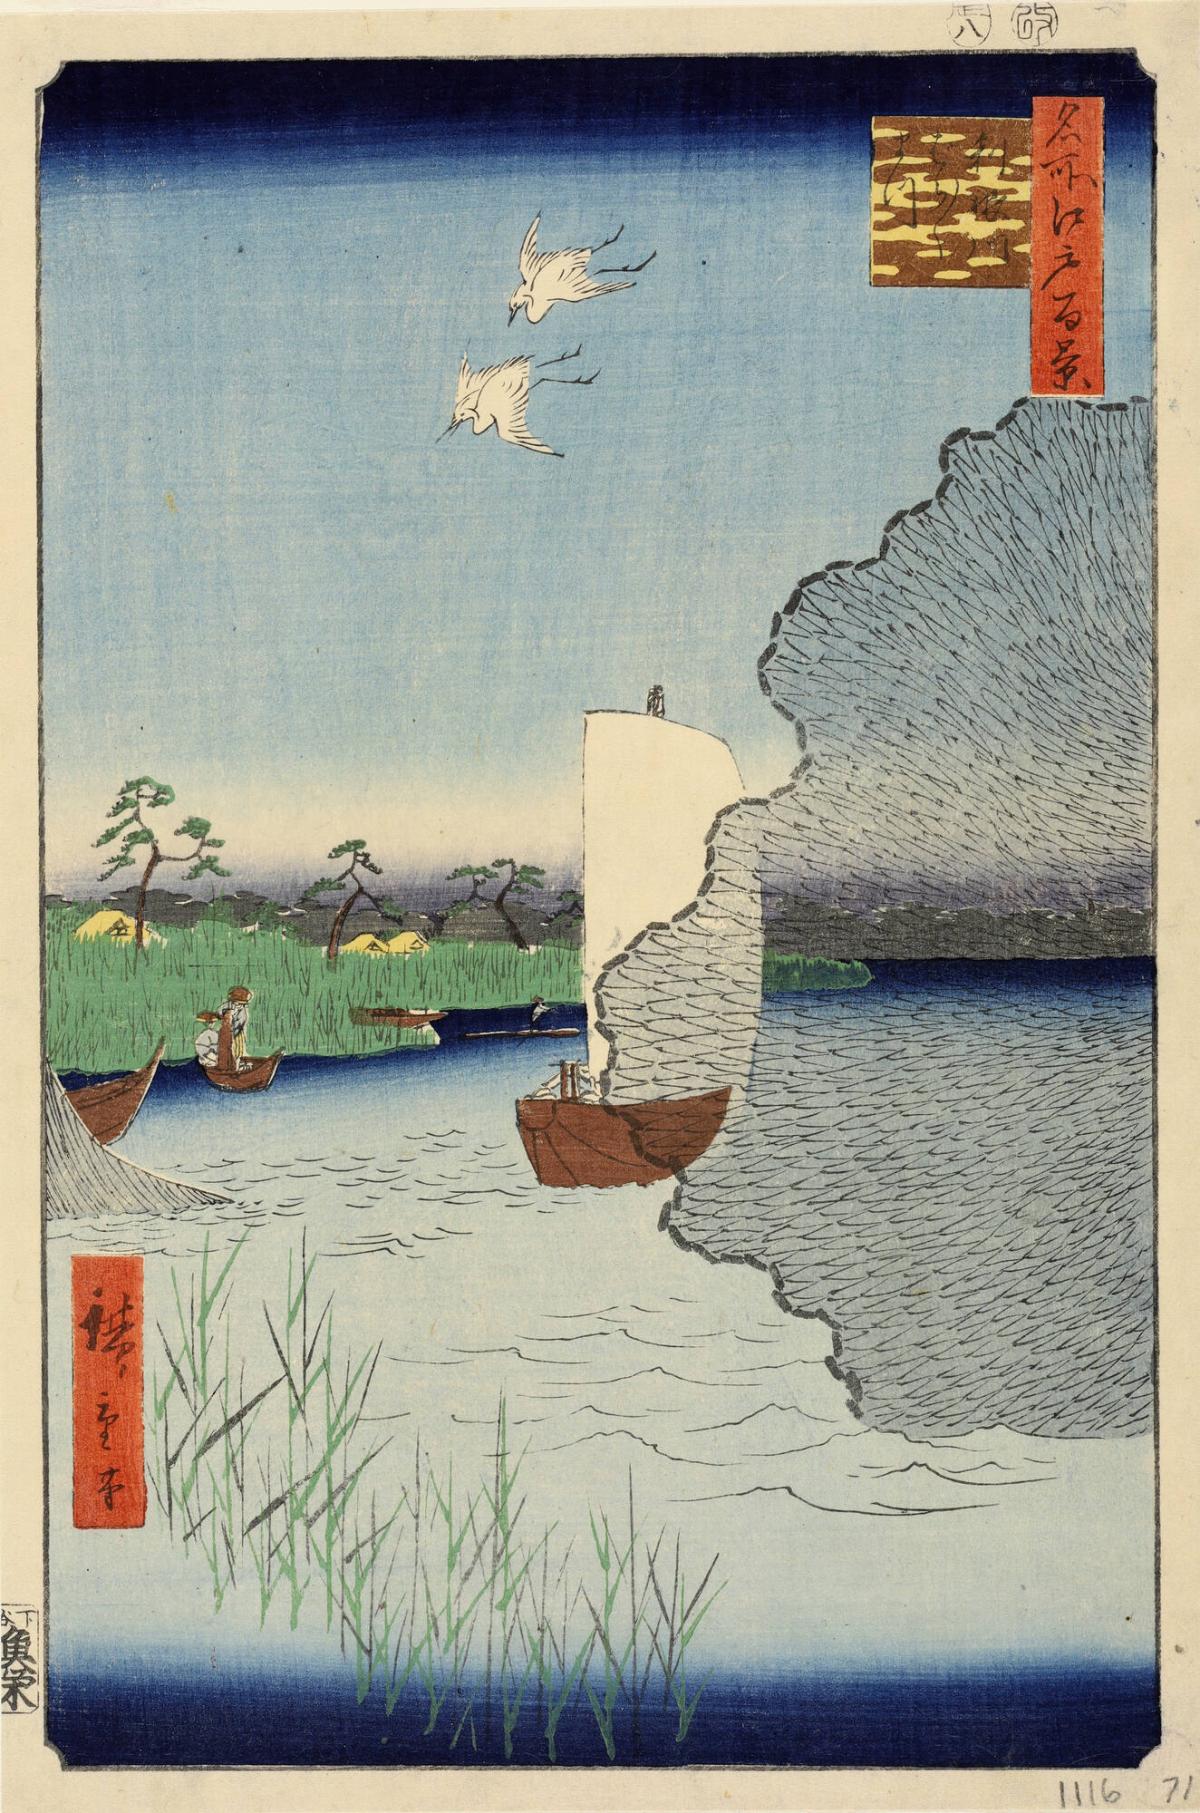 "Scattered Pines" on the Bank of the Tone River (Tonegawa Barabara-matsu), from the series One Hundred Famous Views of Edo (Meisho Edo hyakkei)